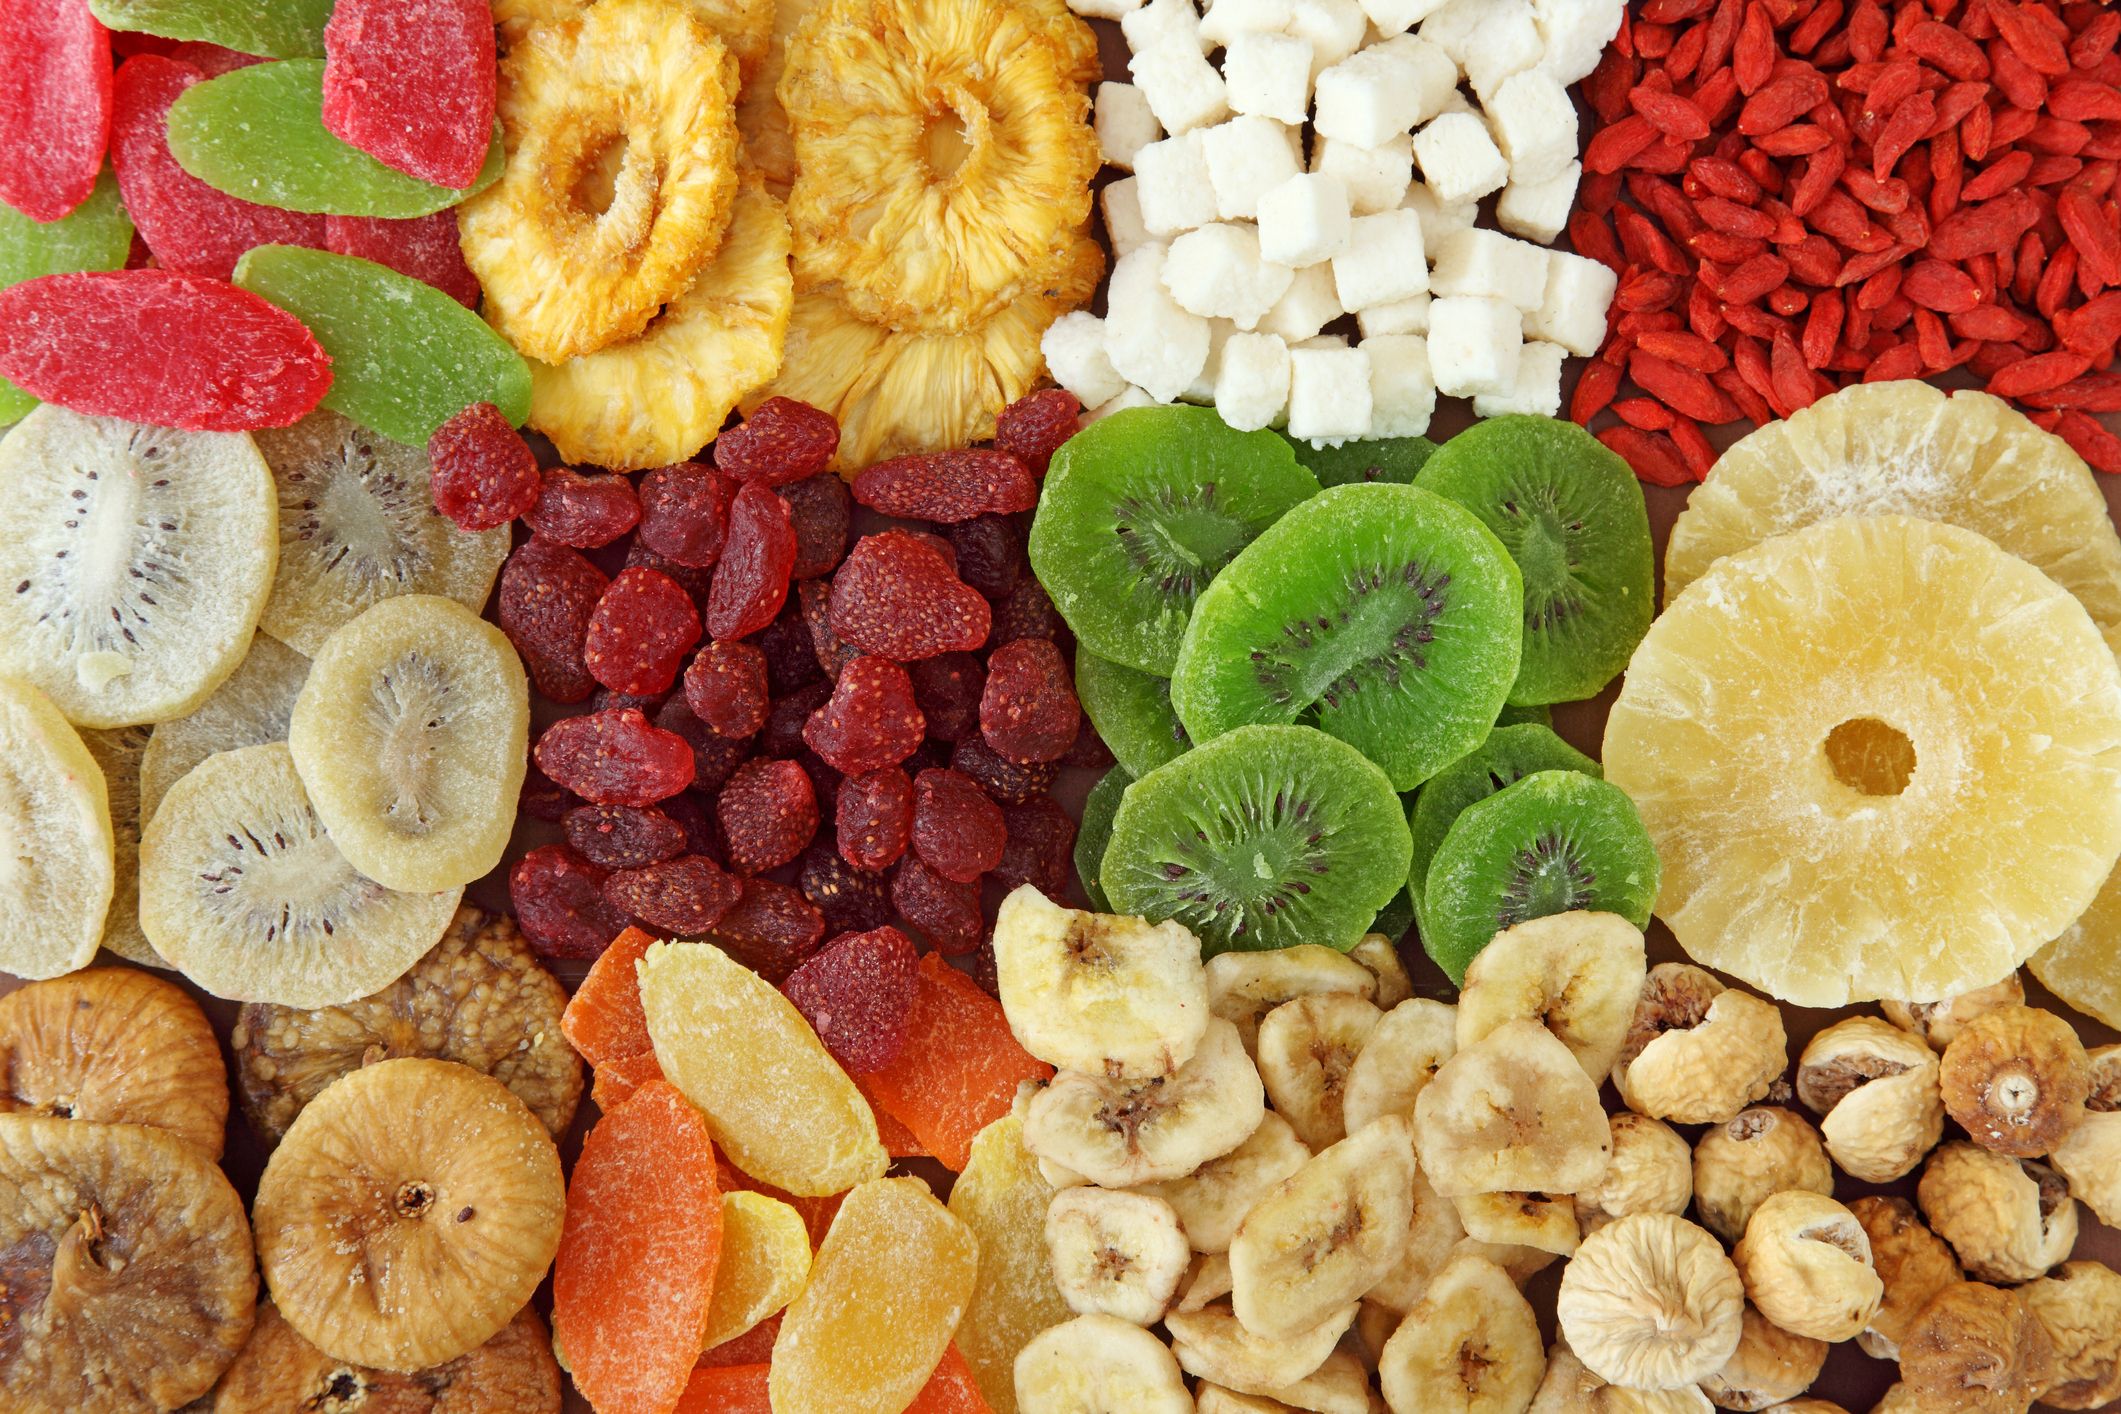 Is dried fruit good for you?